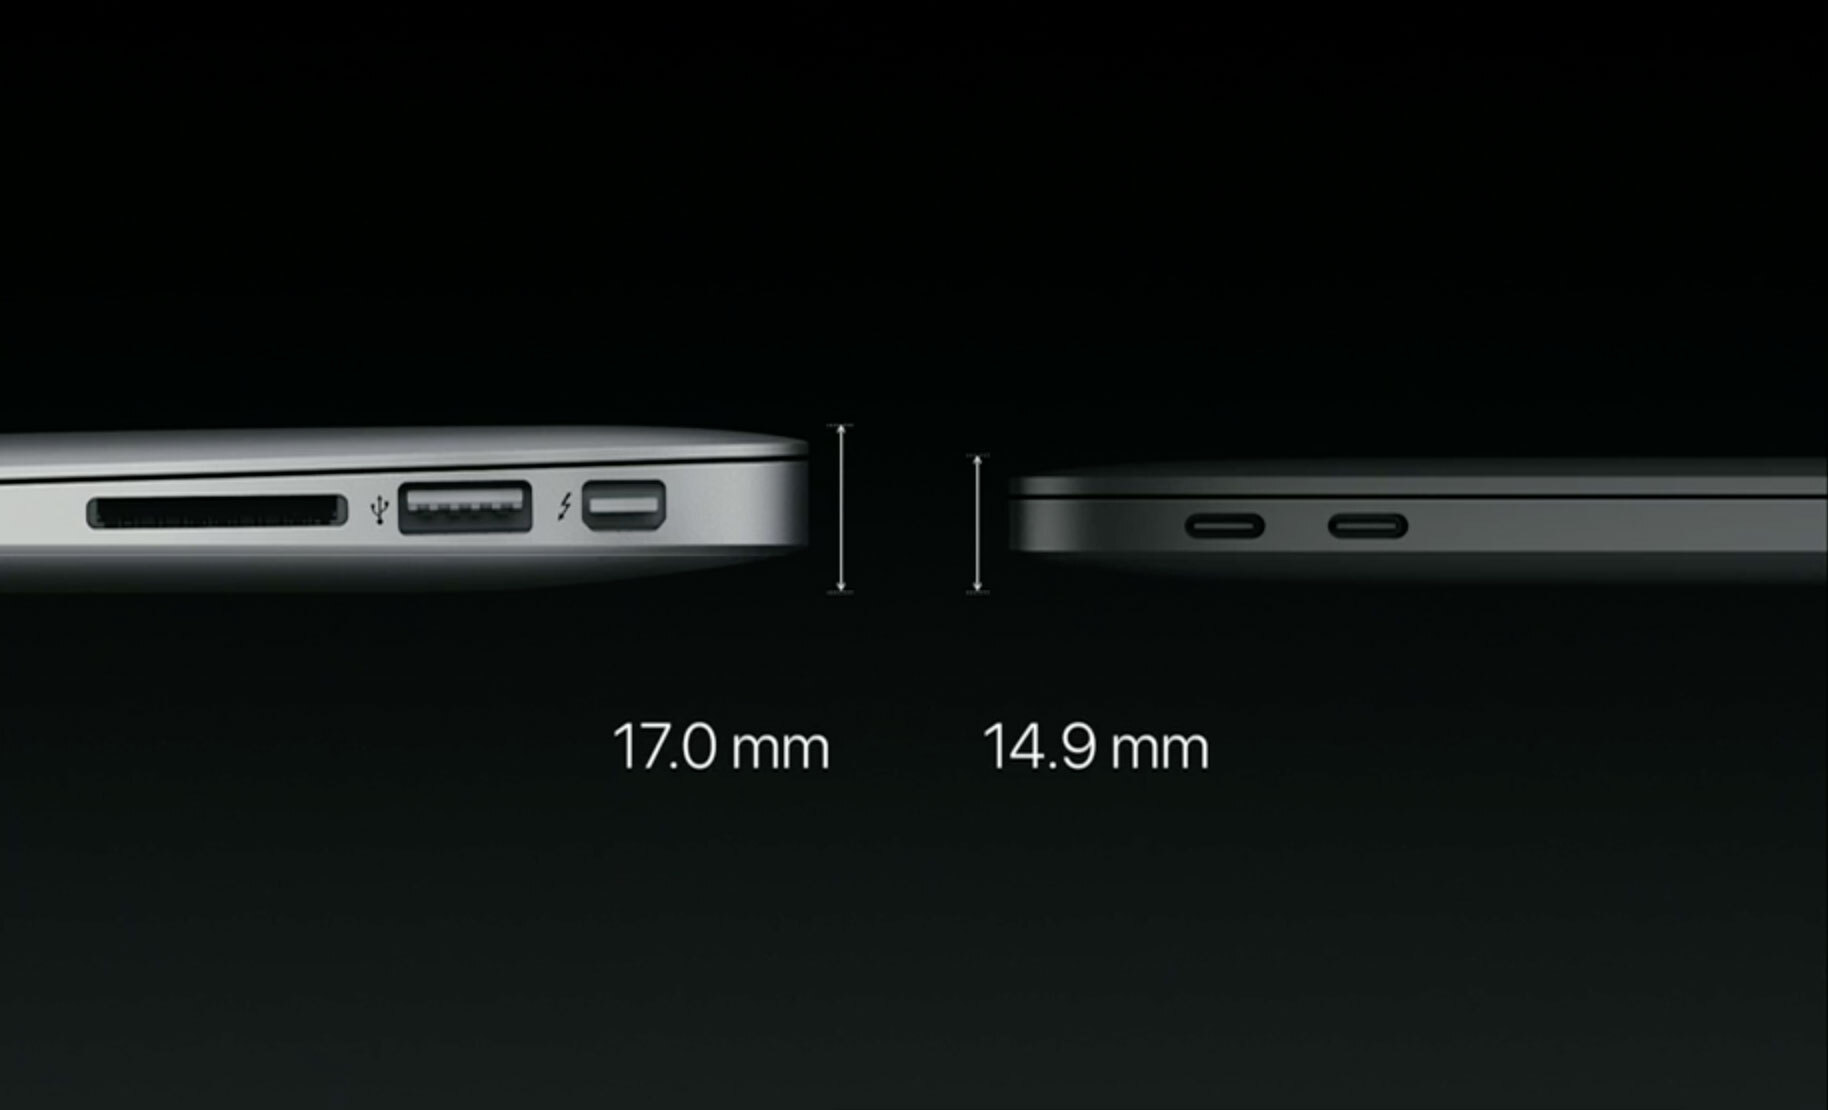 MacBook Air 13in on the left, 13in MacBook Pro on the right